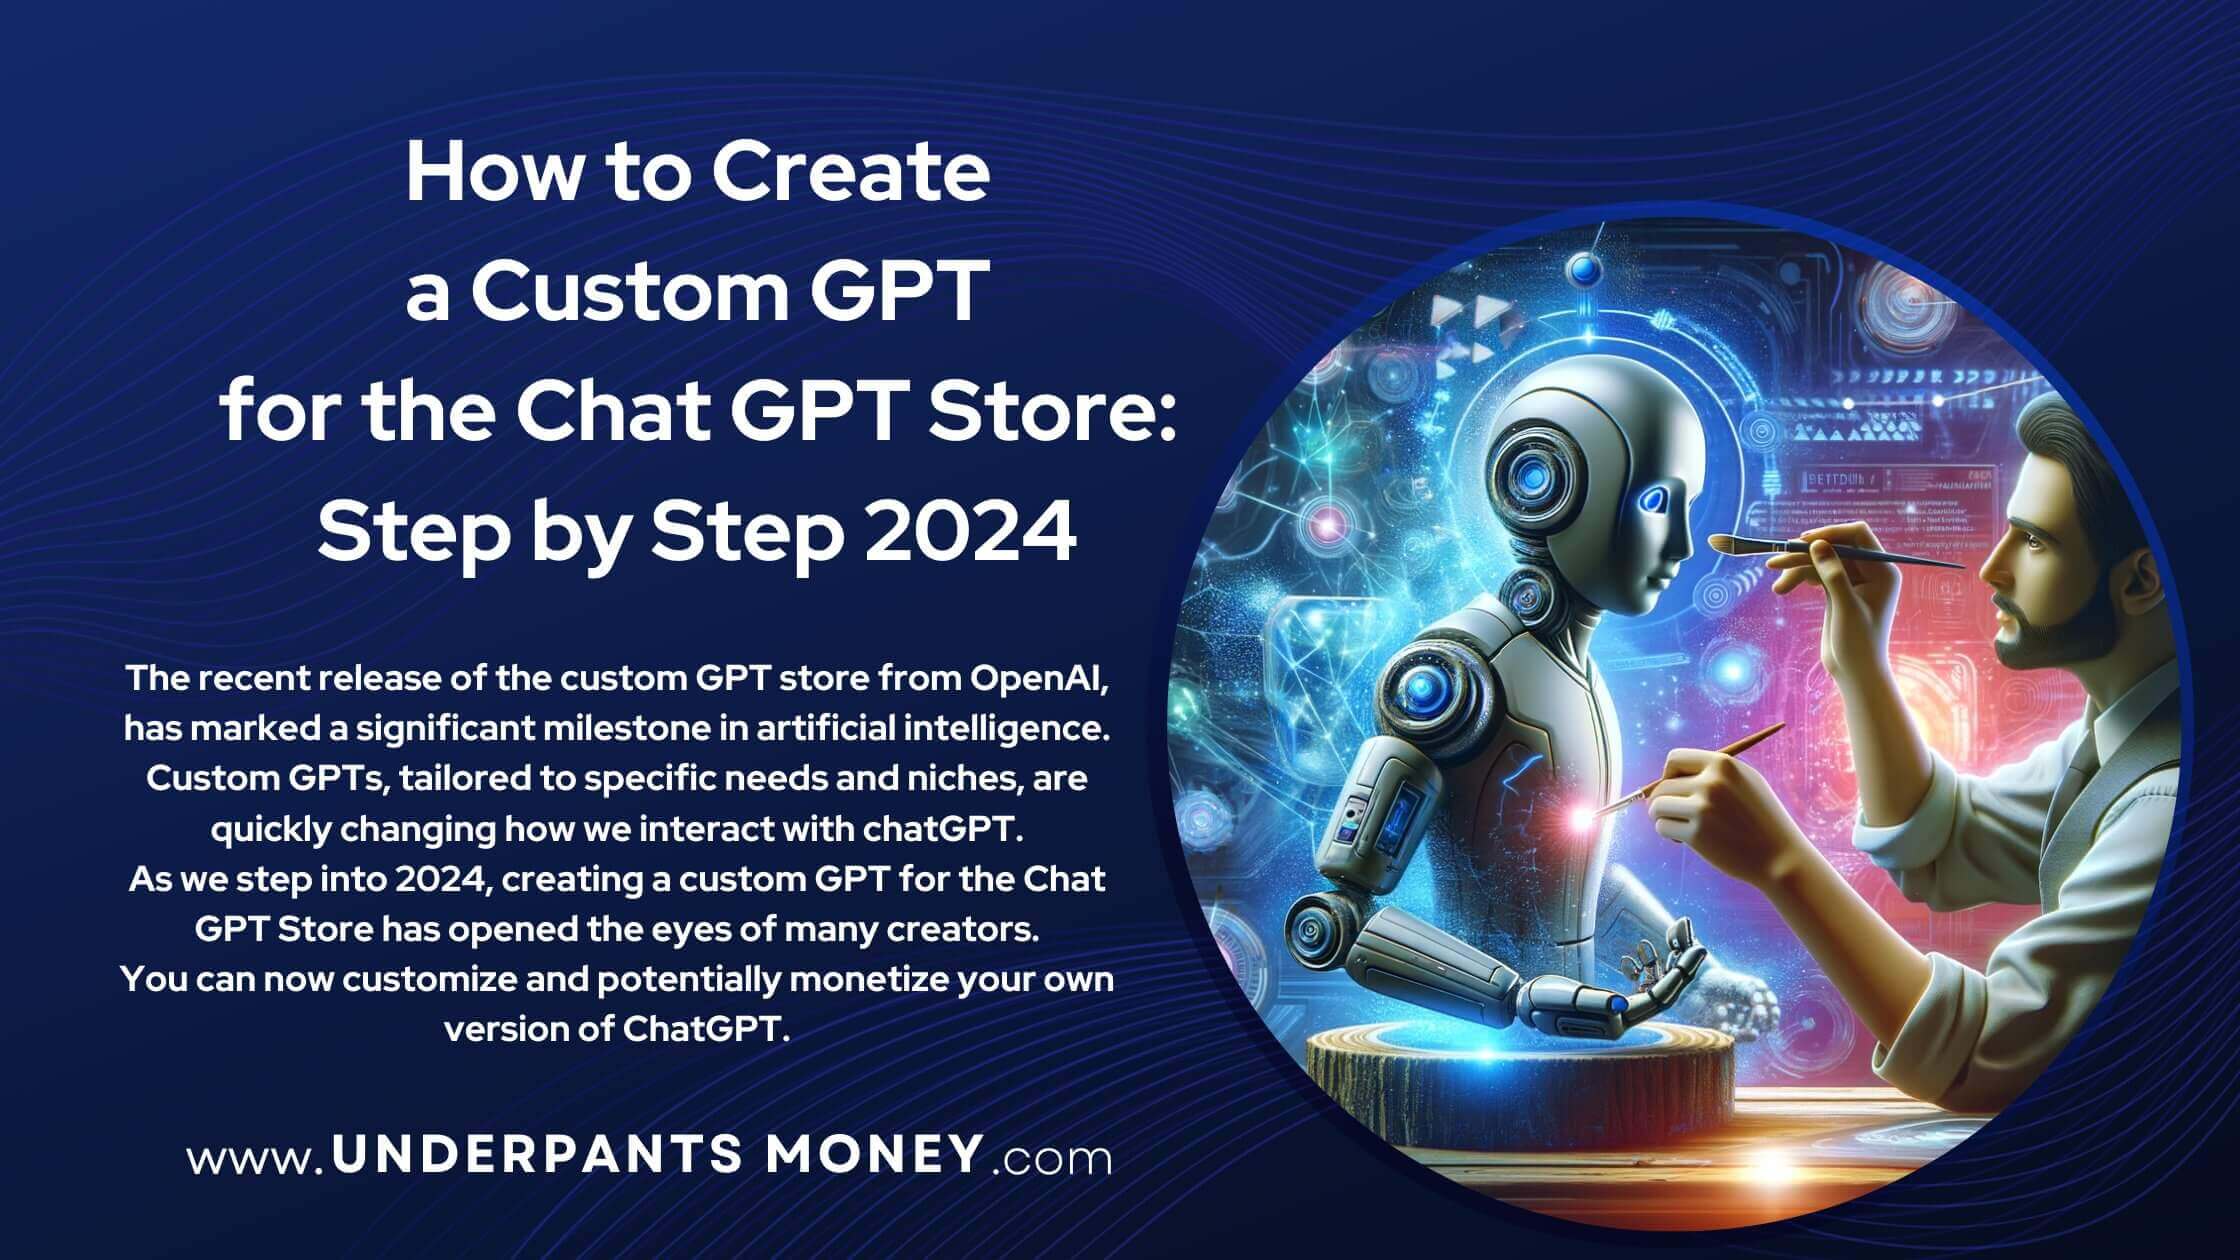 how to create a custom gpt for the gpt store title and description on blue with image of man customizing gpt chat bot